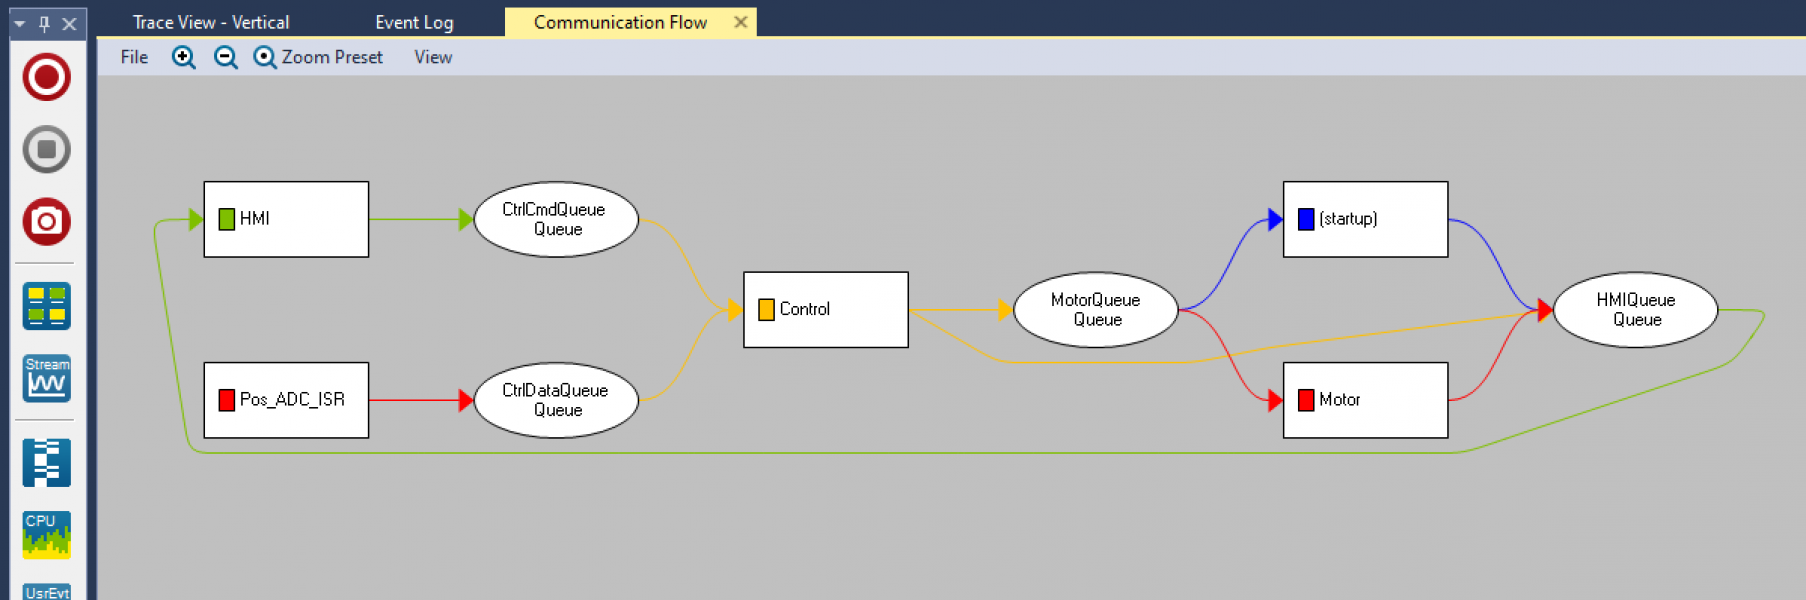 A screen shot of the FreeRTOS-Plus-Trace communication flow view